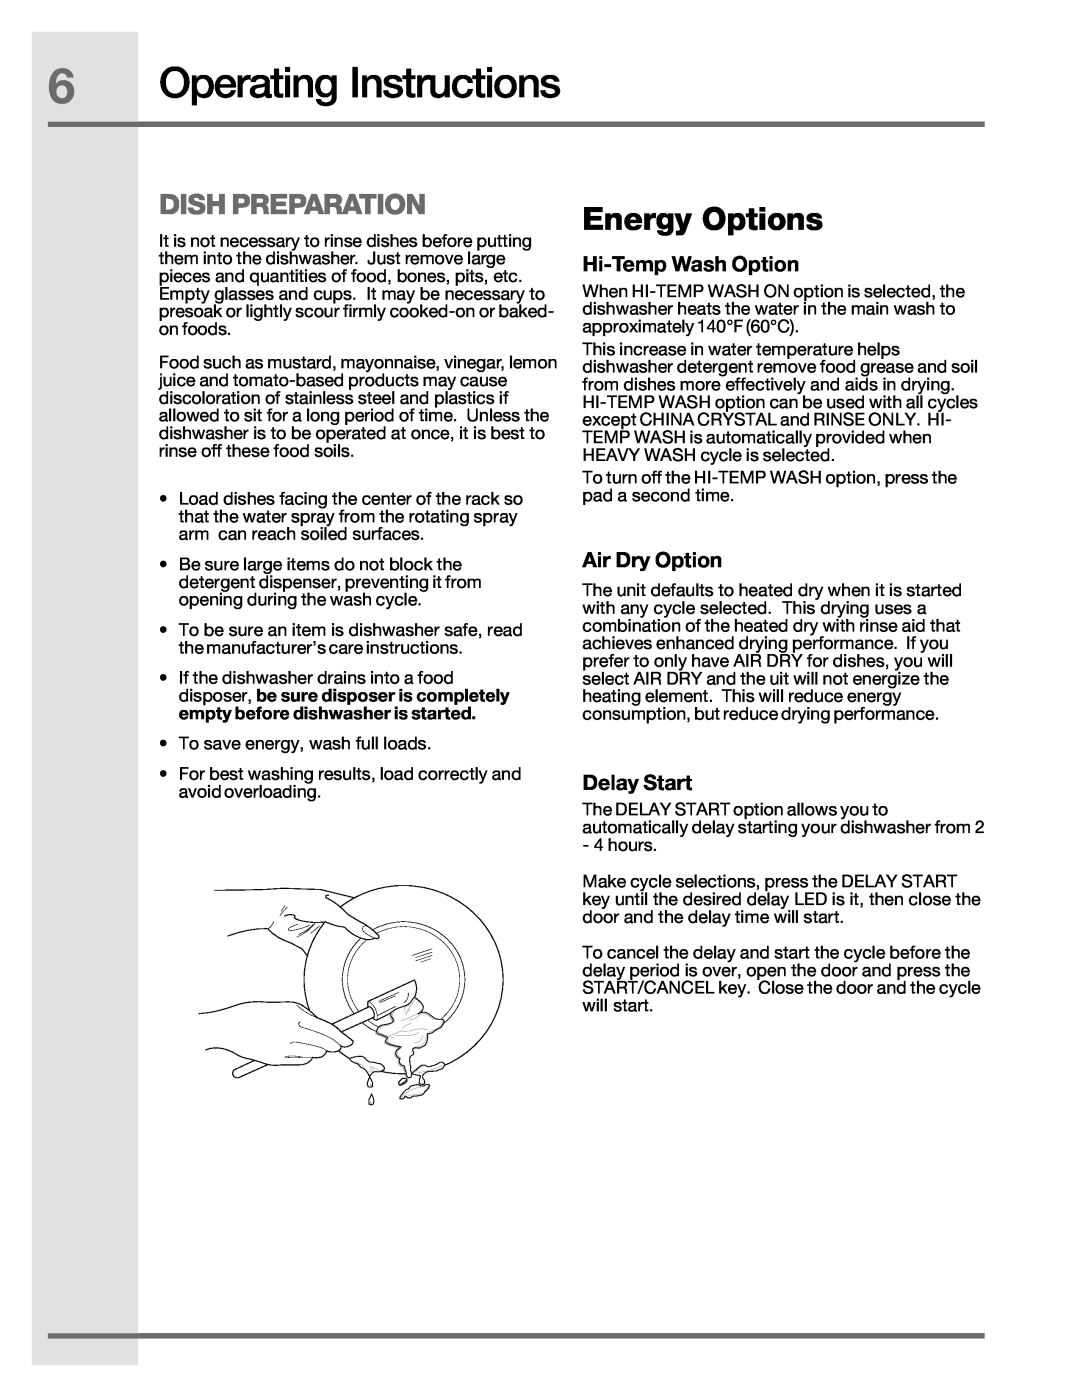 Electrolux 6.75E+11, 2001/05 manual Operating Instructions, Dish Preparation, Energy Options 